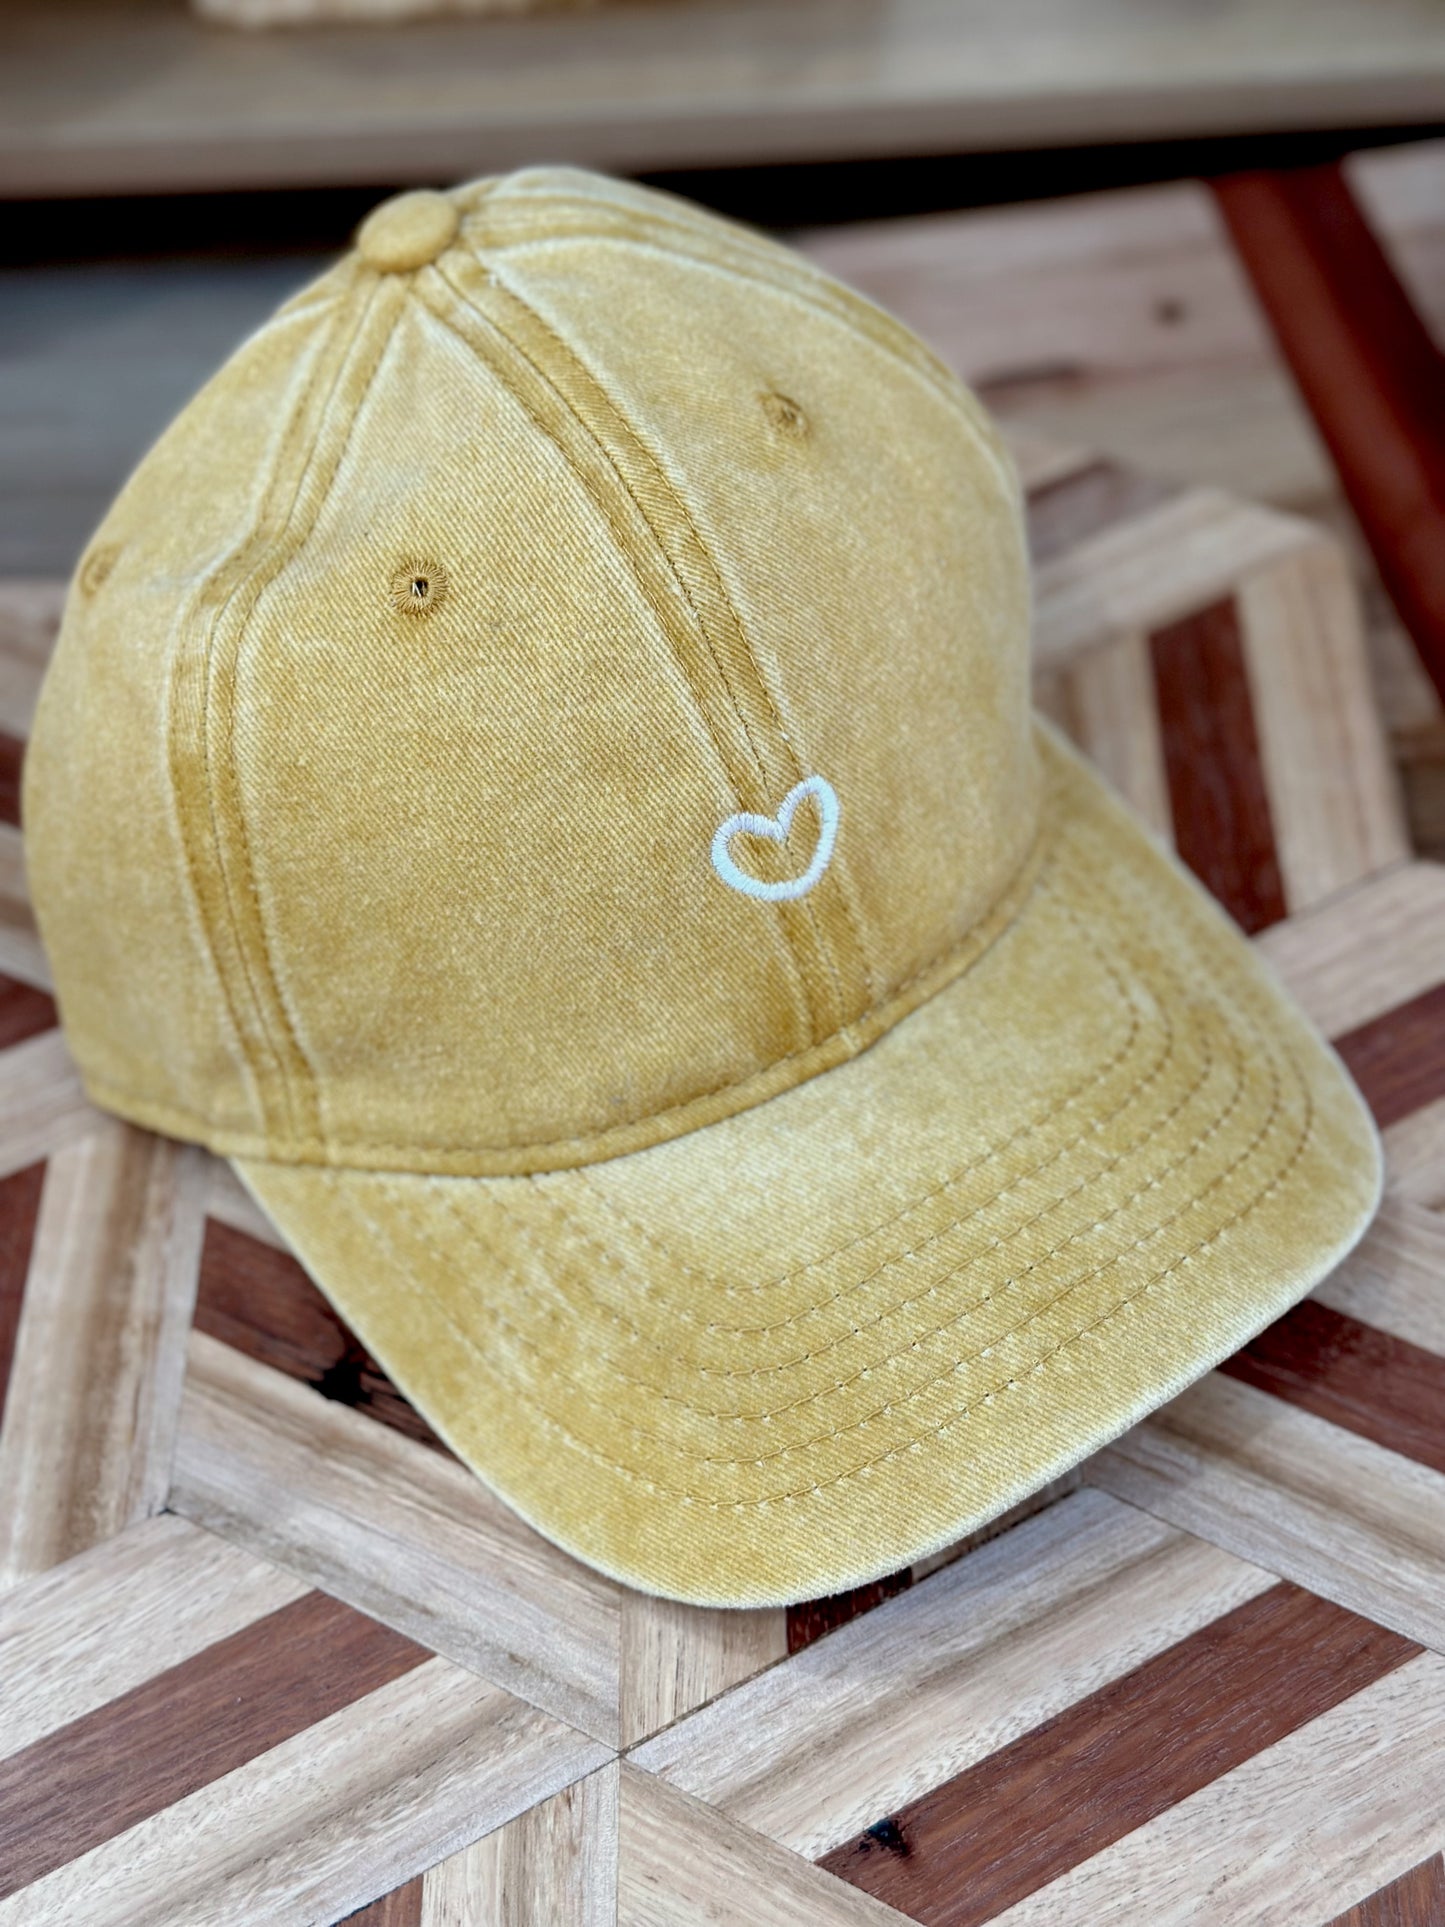 Embroidered Baseball Cap: Assorted